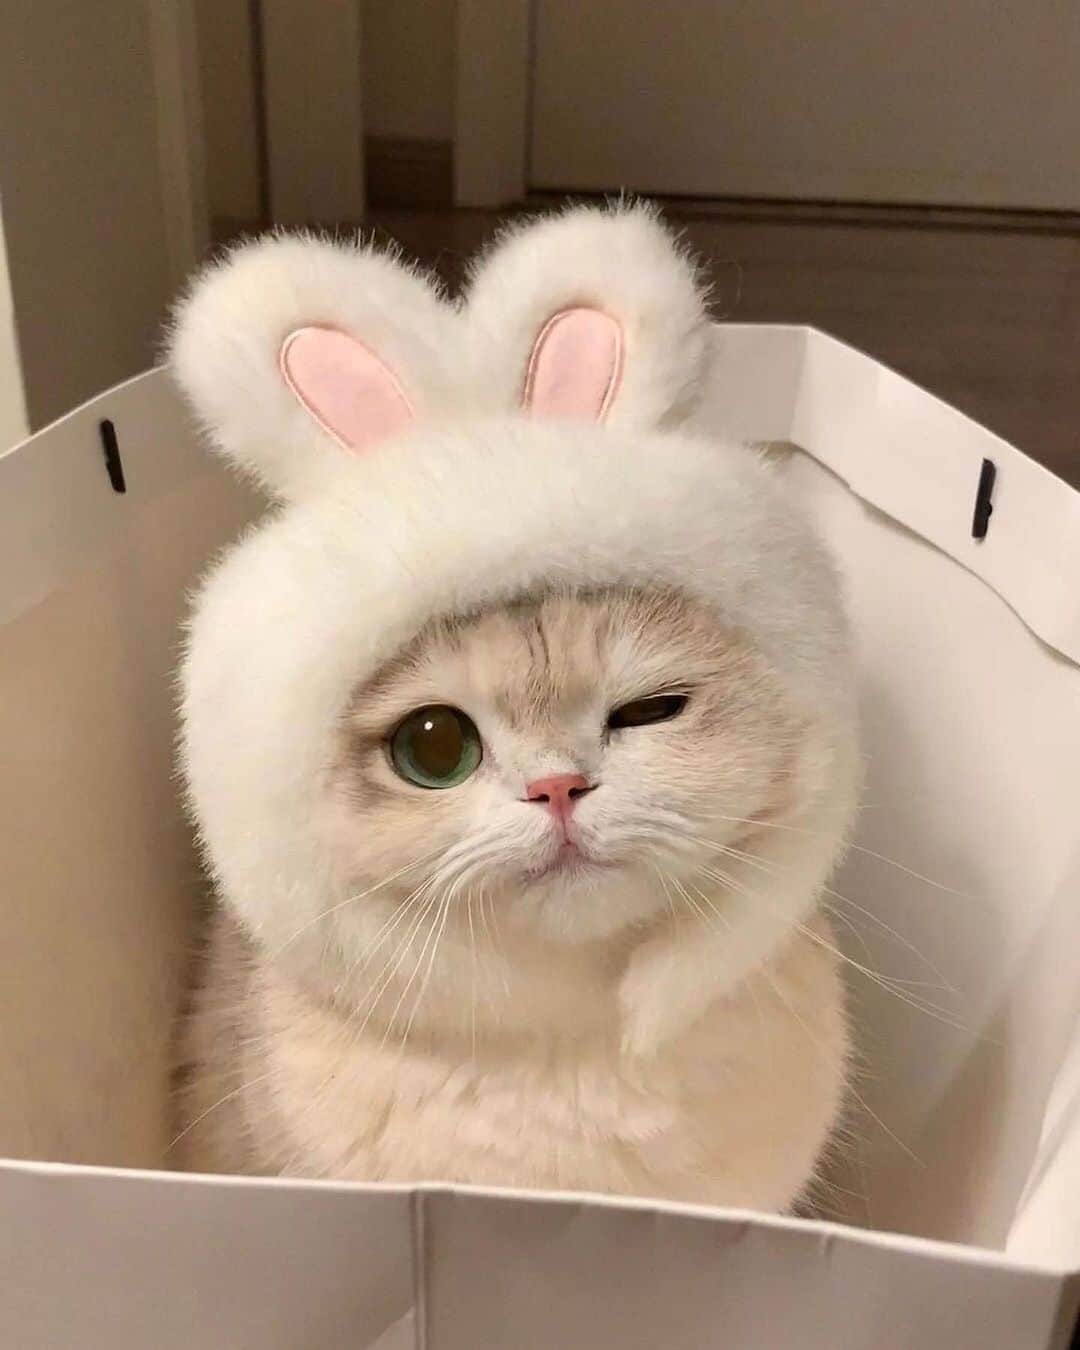 Cute Pets Dogs Catsさんのインスタグラム写真 - (Cute Pets Dogs CatsInstagram)「Bunny 😉  Credit: @薄荷猫猫甜不甜 - DY For all crediting issues and removals pls 𝐄𝐦𝐚𝐢𝐥 𝐮𝐬 ☺️  𝐍𝐨𝐭𝐞: we don’t own this video/pics, all rights go to their respective owners. If owner is not provided, tagged (meaning we couldn’t find who is the owner), 𝐩𝐥𝐬 𝐄𝐦𝐚𝐢𝐥 𝐮𝐬 with 𝐬𝐮𝐛𝐣𝐞𝐜𝐭 “𝐂𝐫𝐞𝐝𝐢𝐭 𝐈𝐬𝐬𝐮𝐞𝐬” and 𝐨𝐰𝐧𝐞𝐫 𝐰𝐢𝐥𝐥 𝐛𝐞 𝐭𝐚𝐠𝐠𝐞𝐝 𝐬𝐡𝐨𝐫𝐭𝐥𝐲 𝐚𝐟𝐭𝐞𝐫.  We have been building this community for over 6 years, but 𝐞𝐯𝐞𝐫𝐲 𝐫𝐞𝐩𝐨𝐫𝐭 𝐜𝐨𝐮𝐥𝐝 𝐠𝐞𝐭 𝐨𝐮𝐫 𝐩𝐚𝐠𝐞 𝐝𝐞𝐥𝐞𝐭𝐞𝐝, pls email us first. **」10月25日 6時56分 - dailycatclub